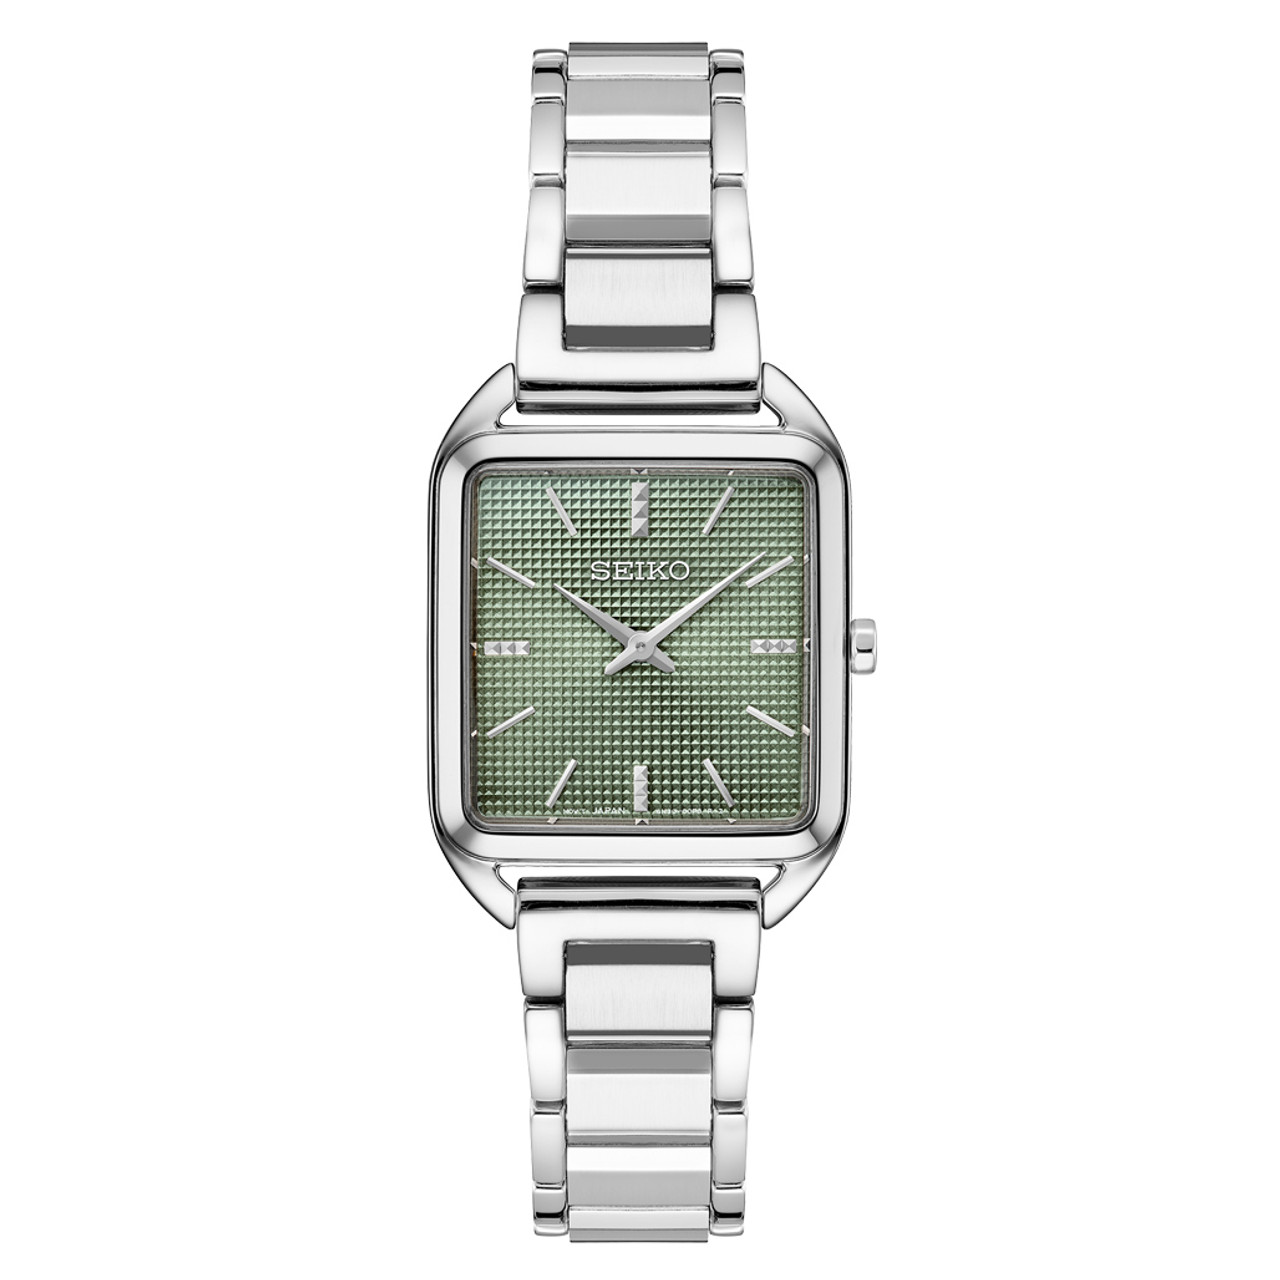 Seiko Essentials Tank Watch with Green Grid Pattern Dial #SWR075